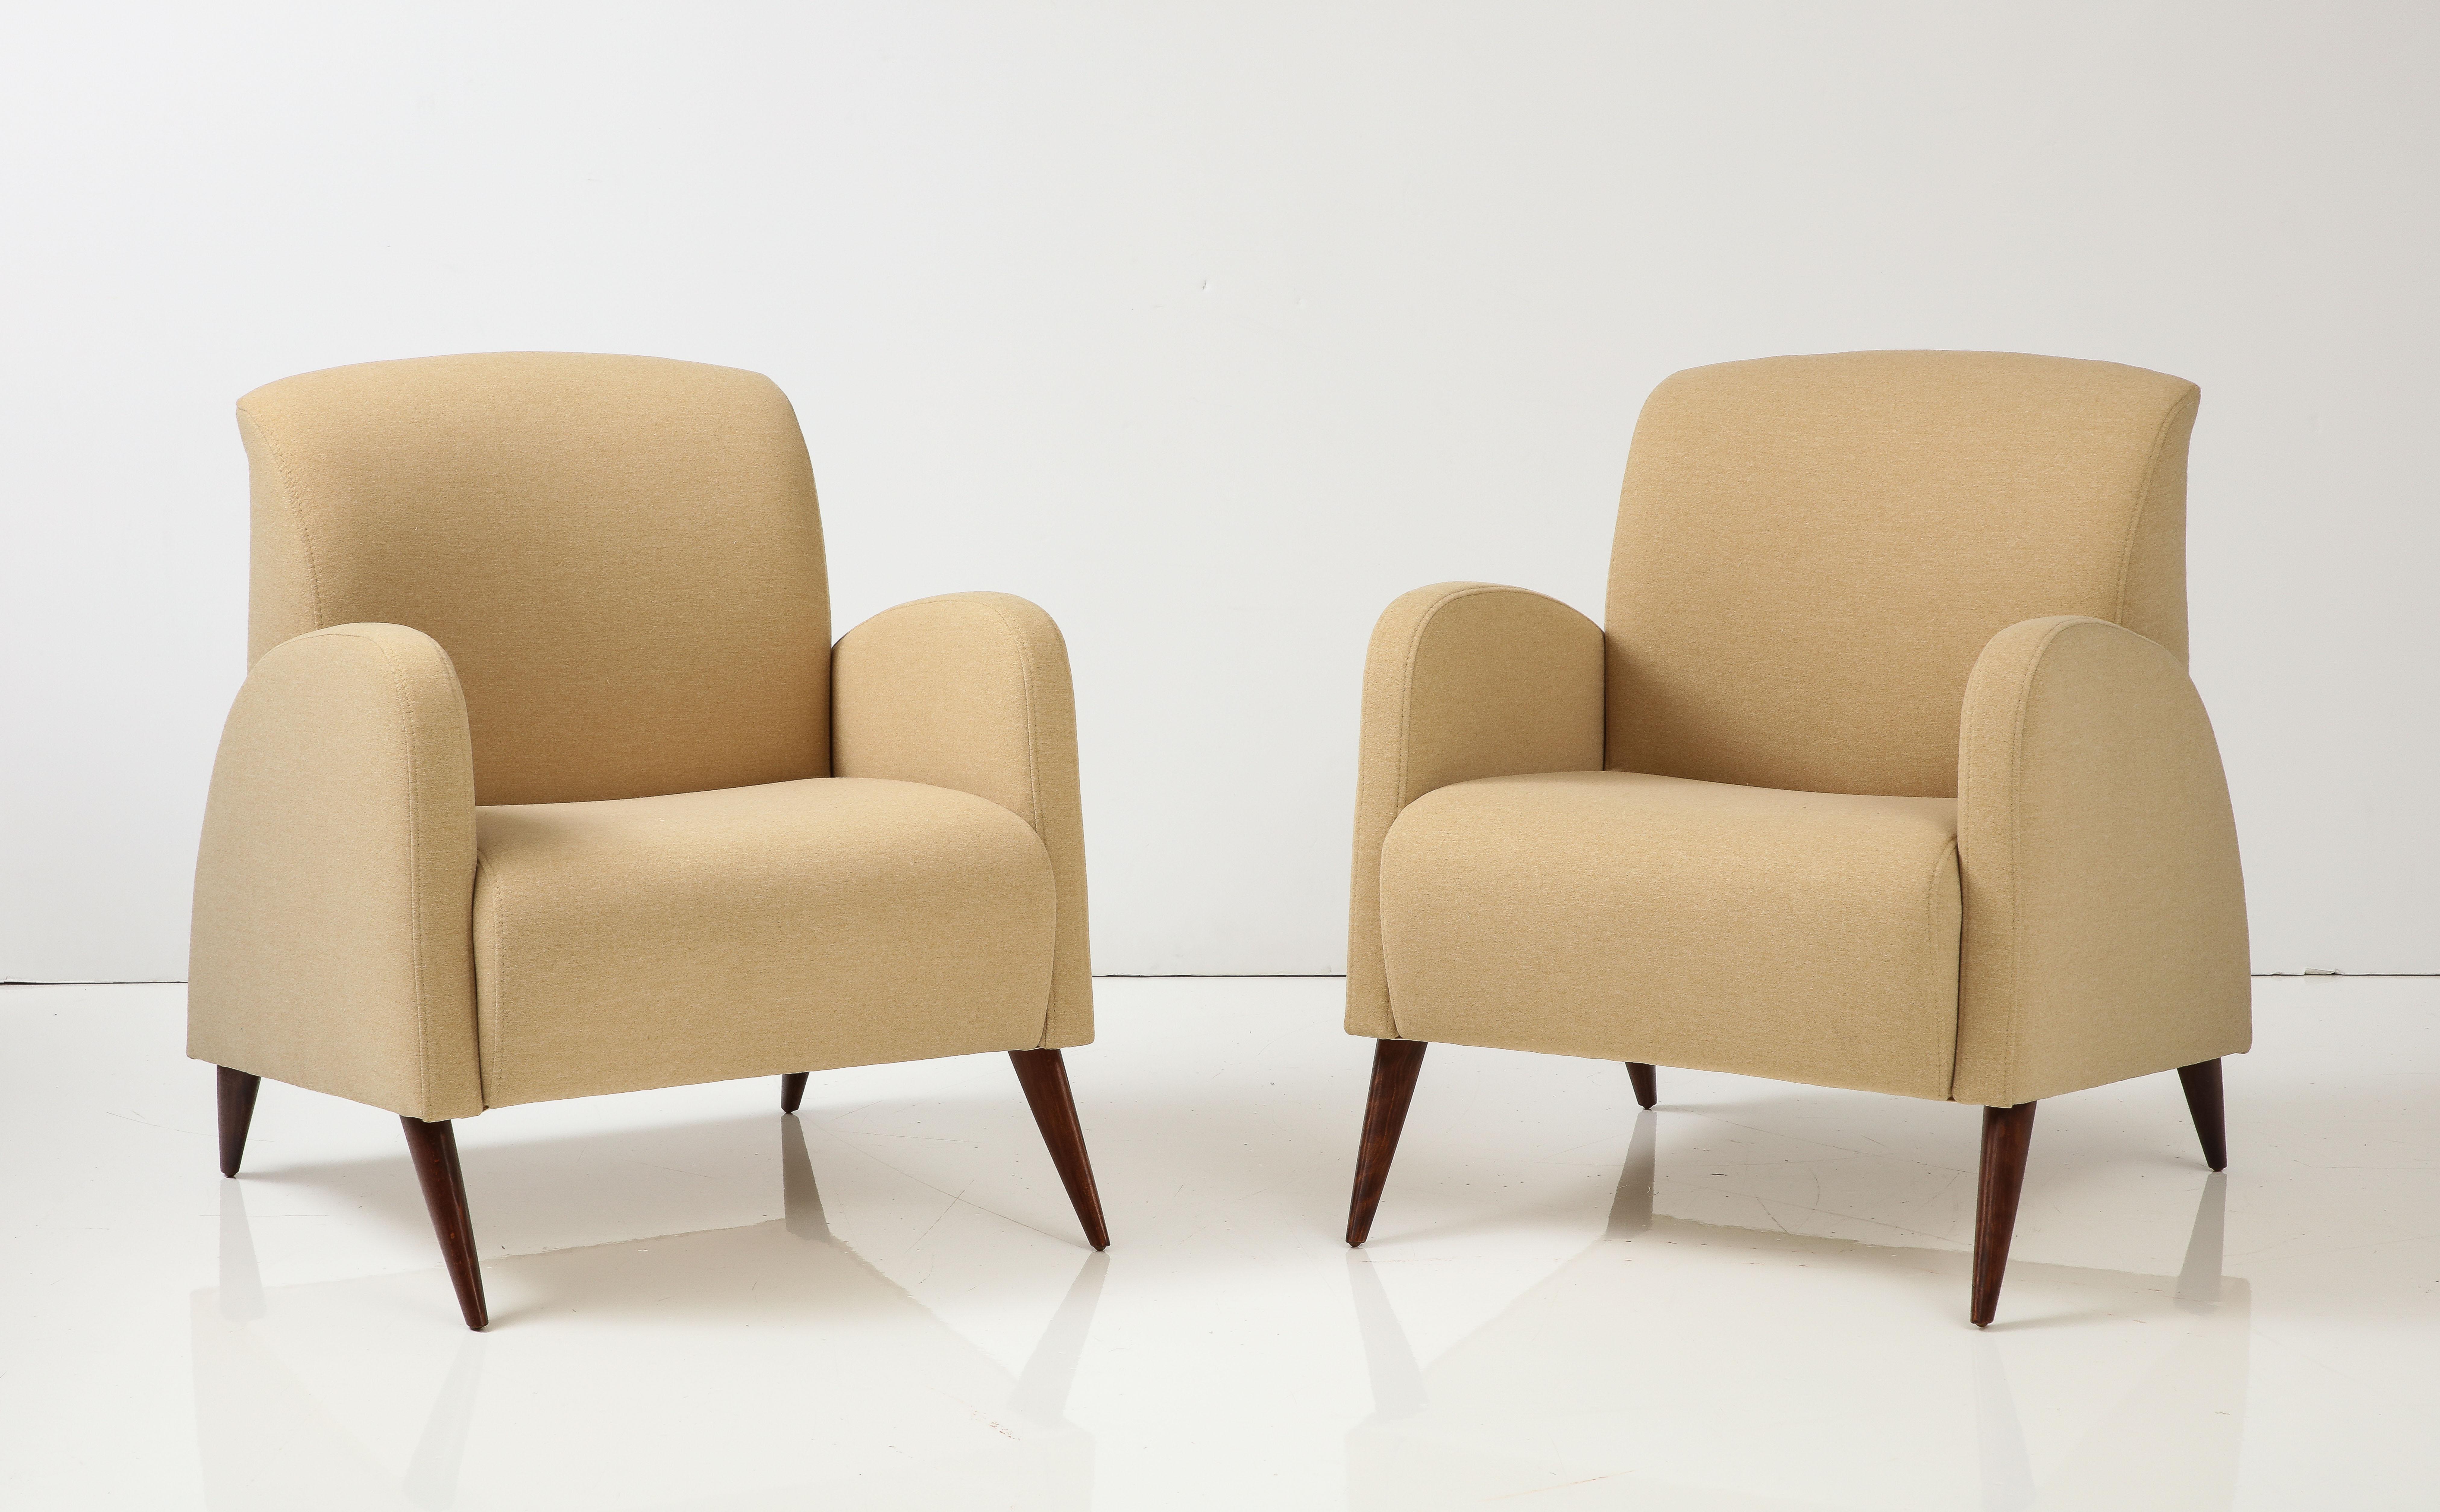 Pair of Italian Art Deco Lounge Chairs, circa 1940 In Good Condition For Sale In New York, NY